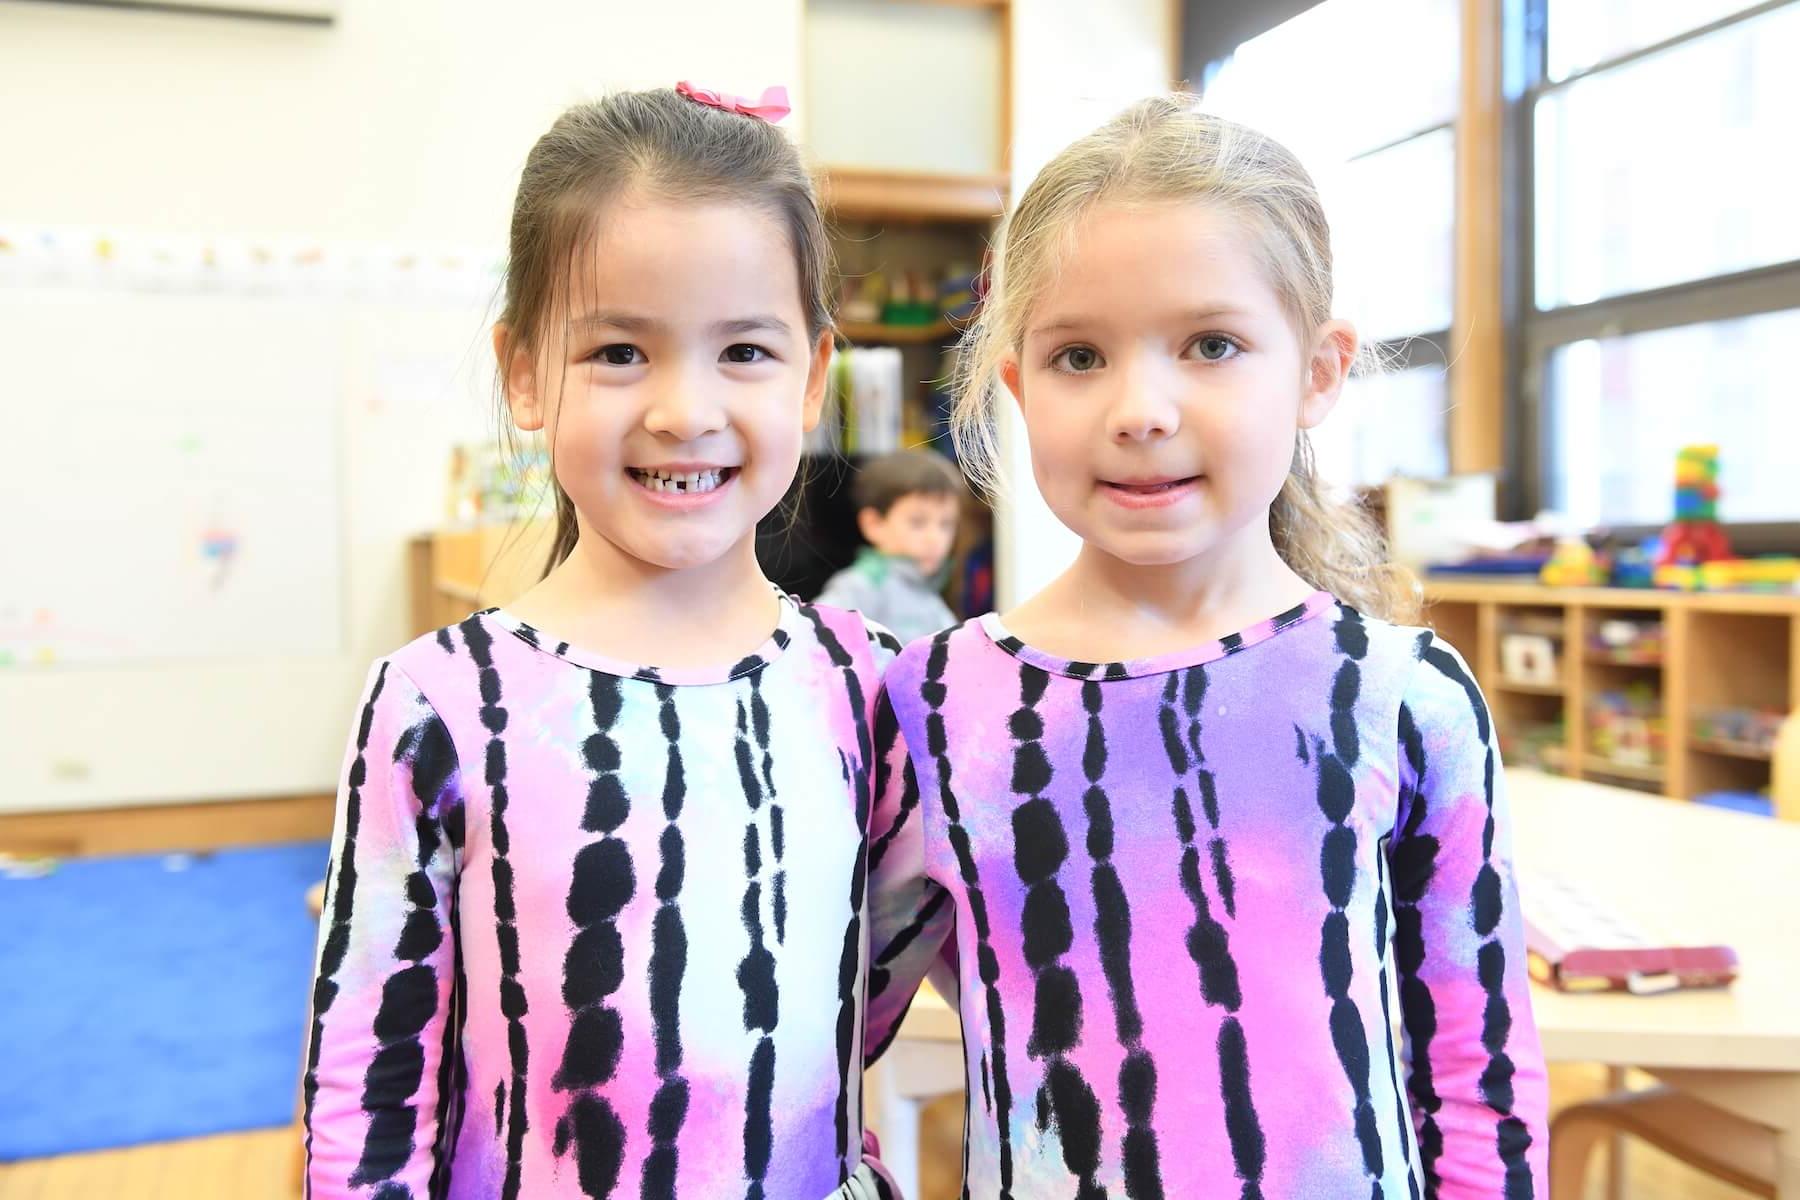 Ethical Culture Fieldston School students in matching shirts smile at the camera